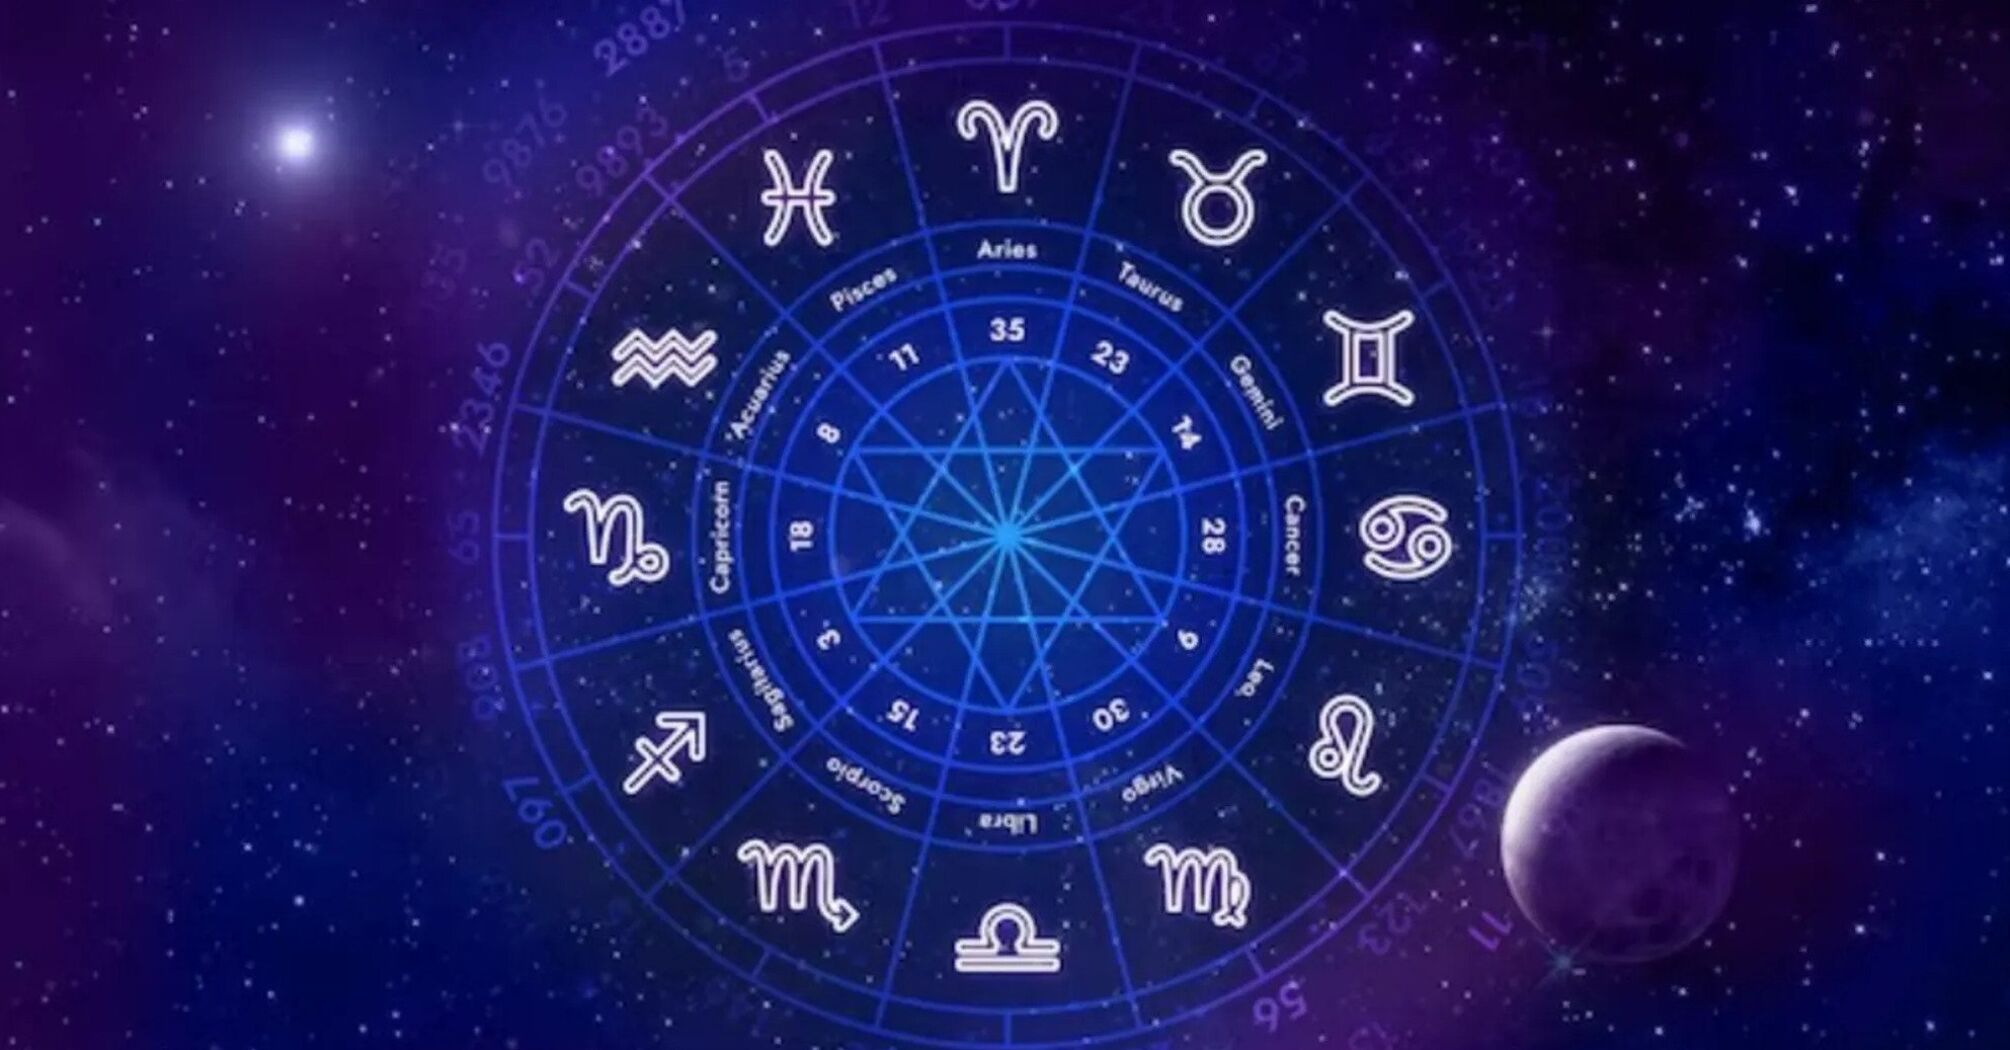 Representatives of the five zodiac signs will be the most inpatient this week